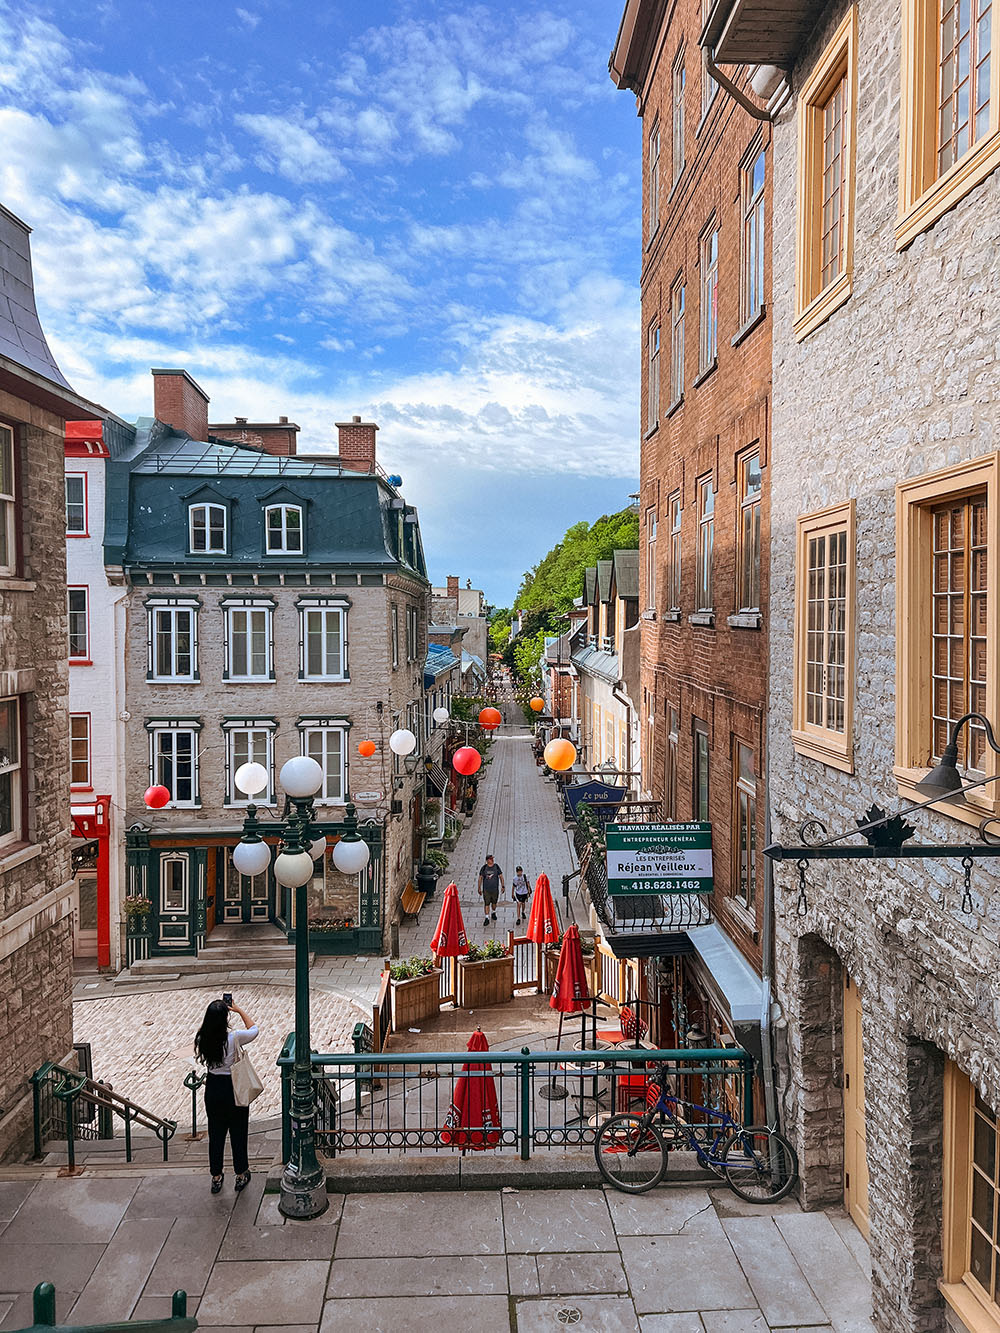 Quebec City feels like a little slice of Europe in Canada, and it's no surprise that most people who visit immediately fall in love with it's old world charm. From the gorgeous old architecture, cute cafes and cobblestoned streets, and beautiful parks, there's more than enough places here to snap your next instagram photo. If you're planning on visiting Quebec City soon you definitely don't want to miss this guide on the most instagrammable places in Quebec City! Pictured here: Breakneck Stairs